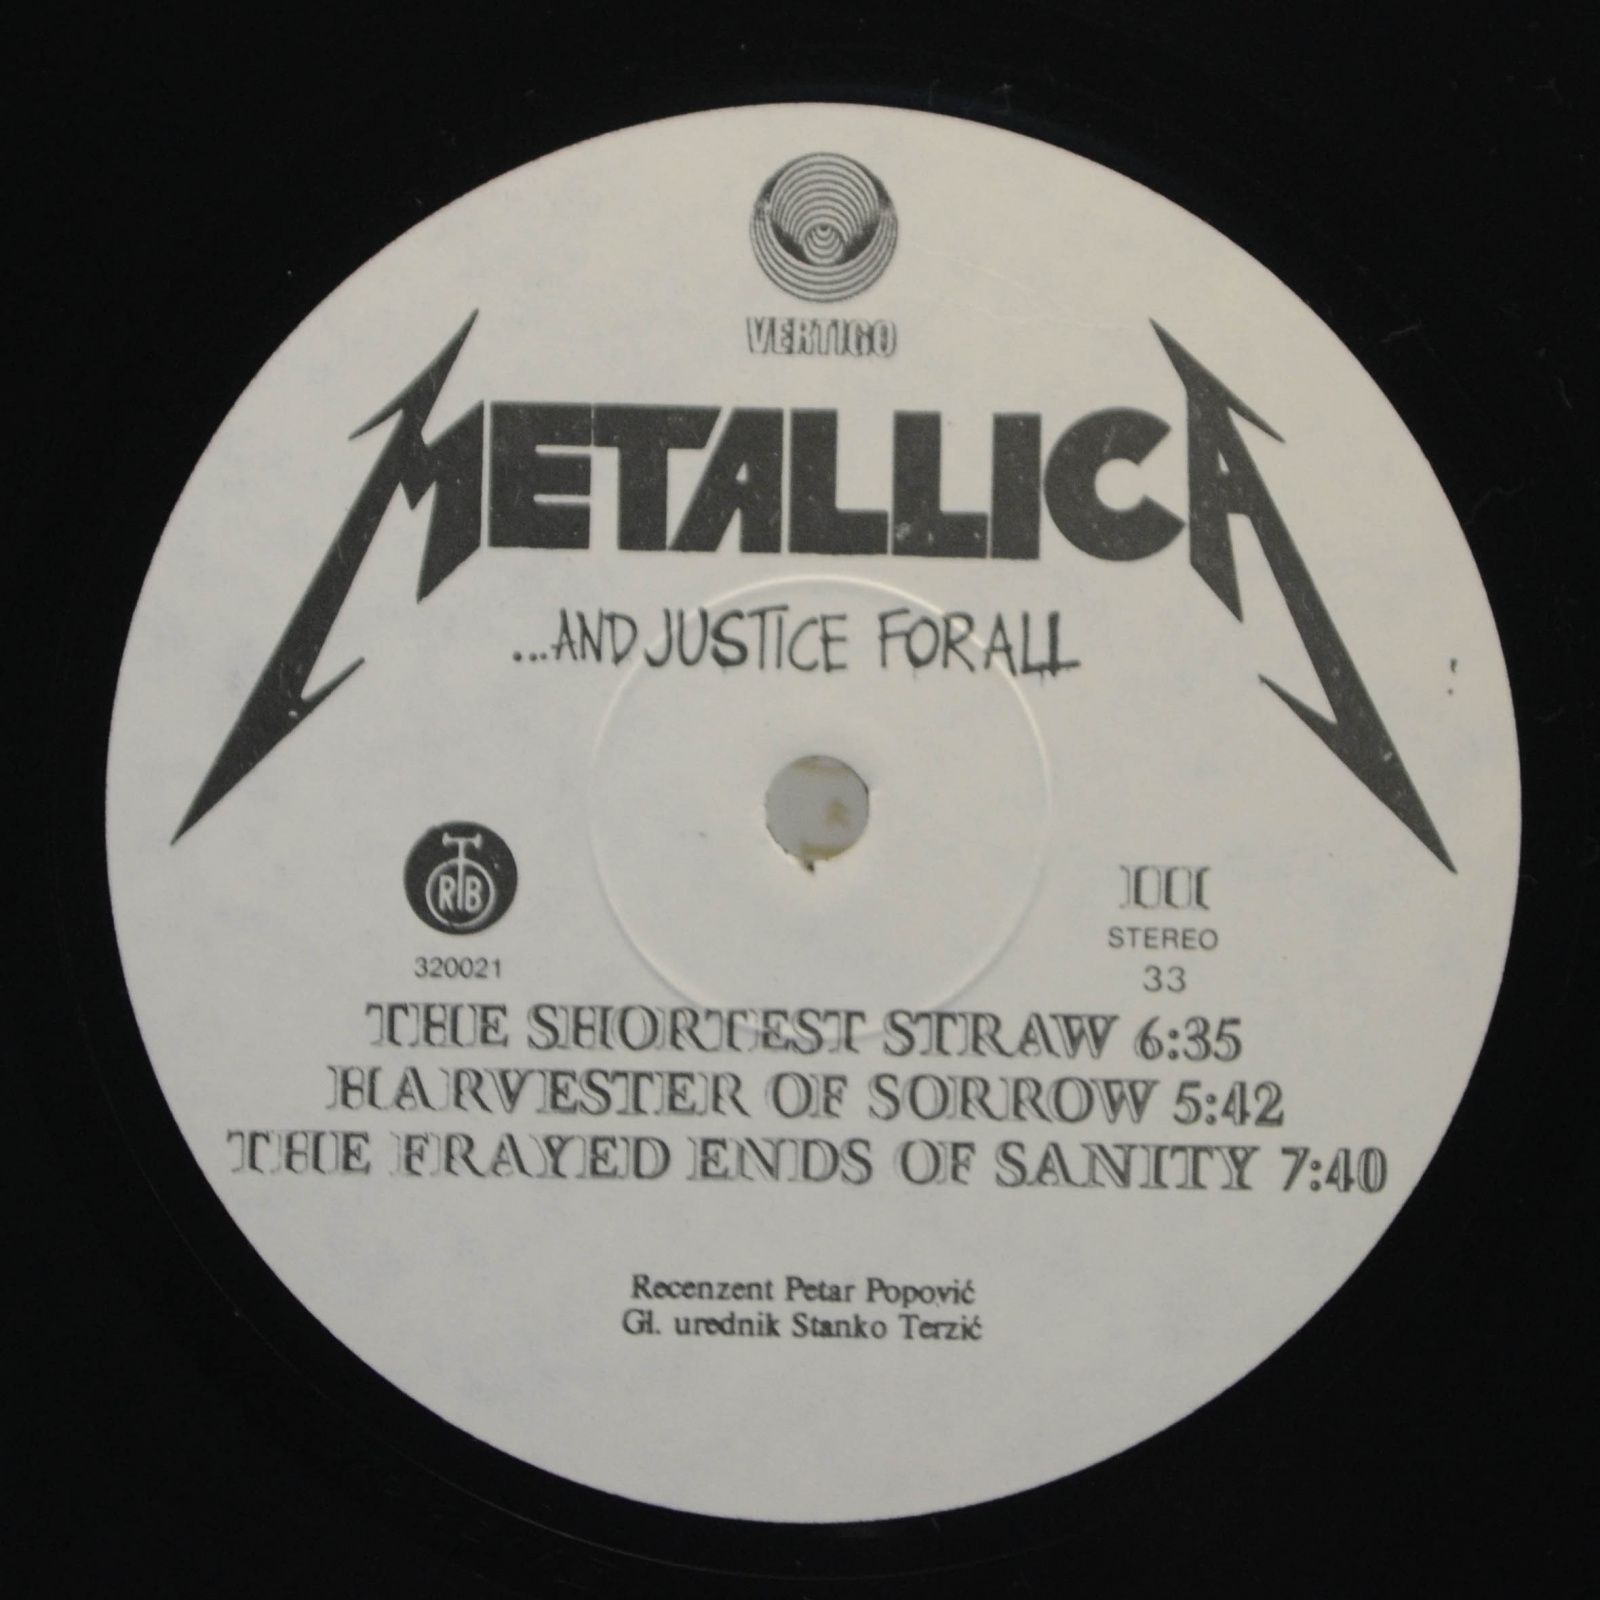 Metallica — ...And Justice For All, 1988